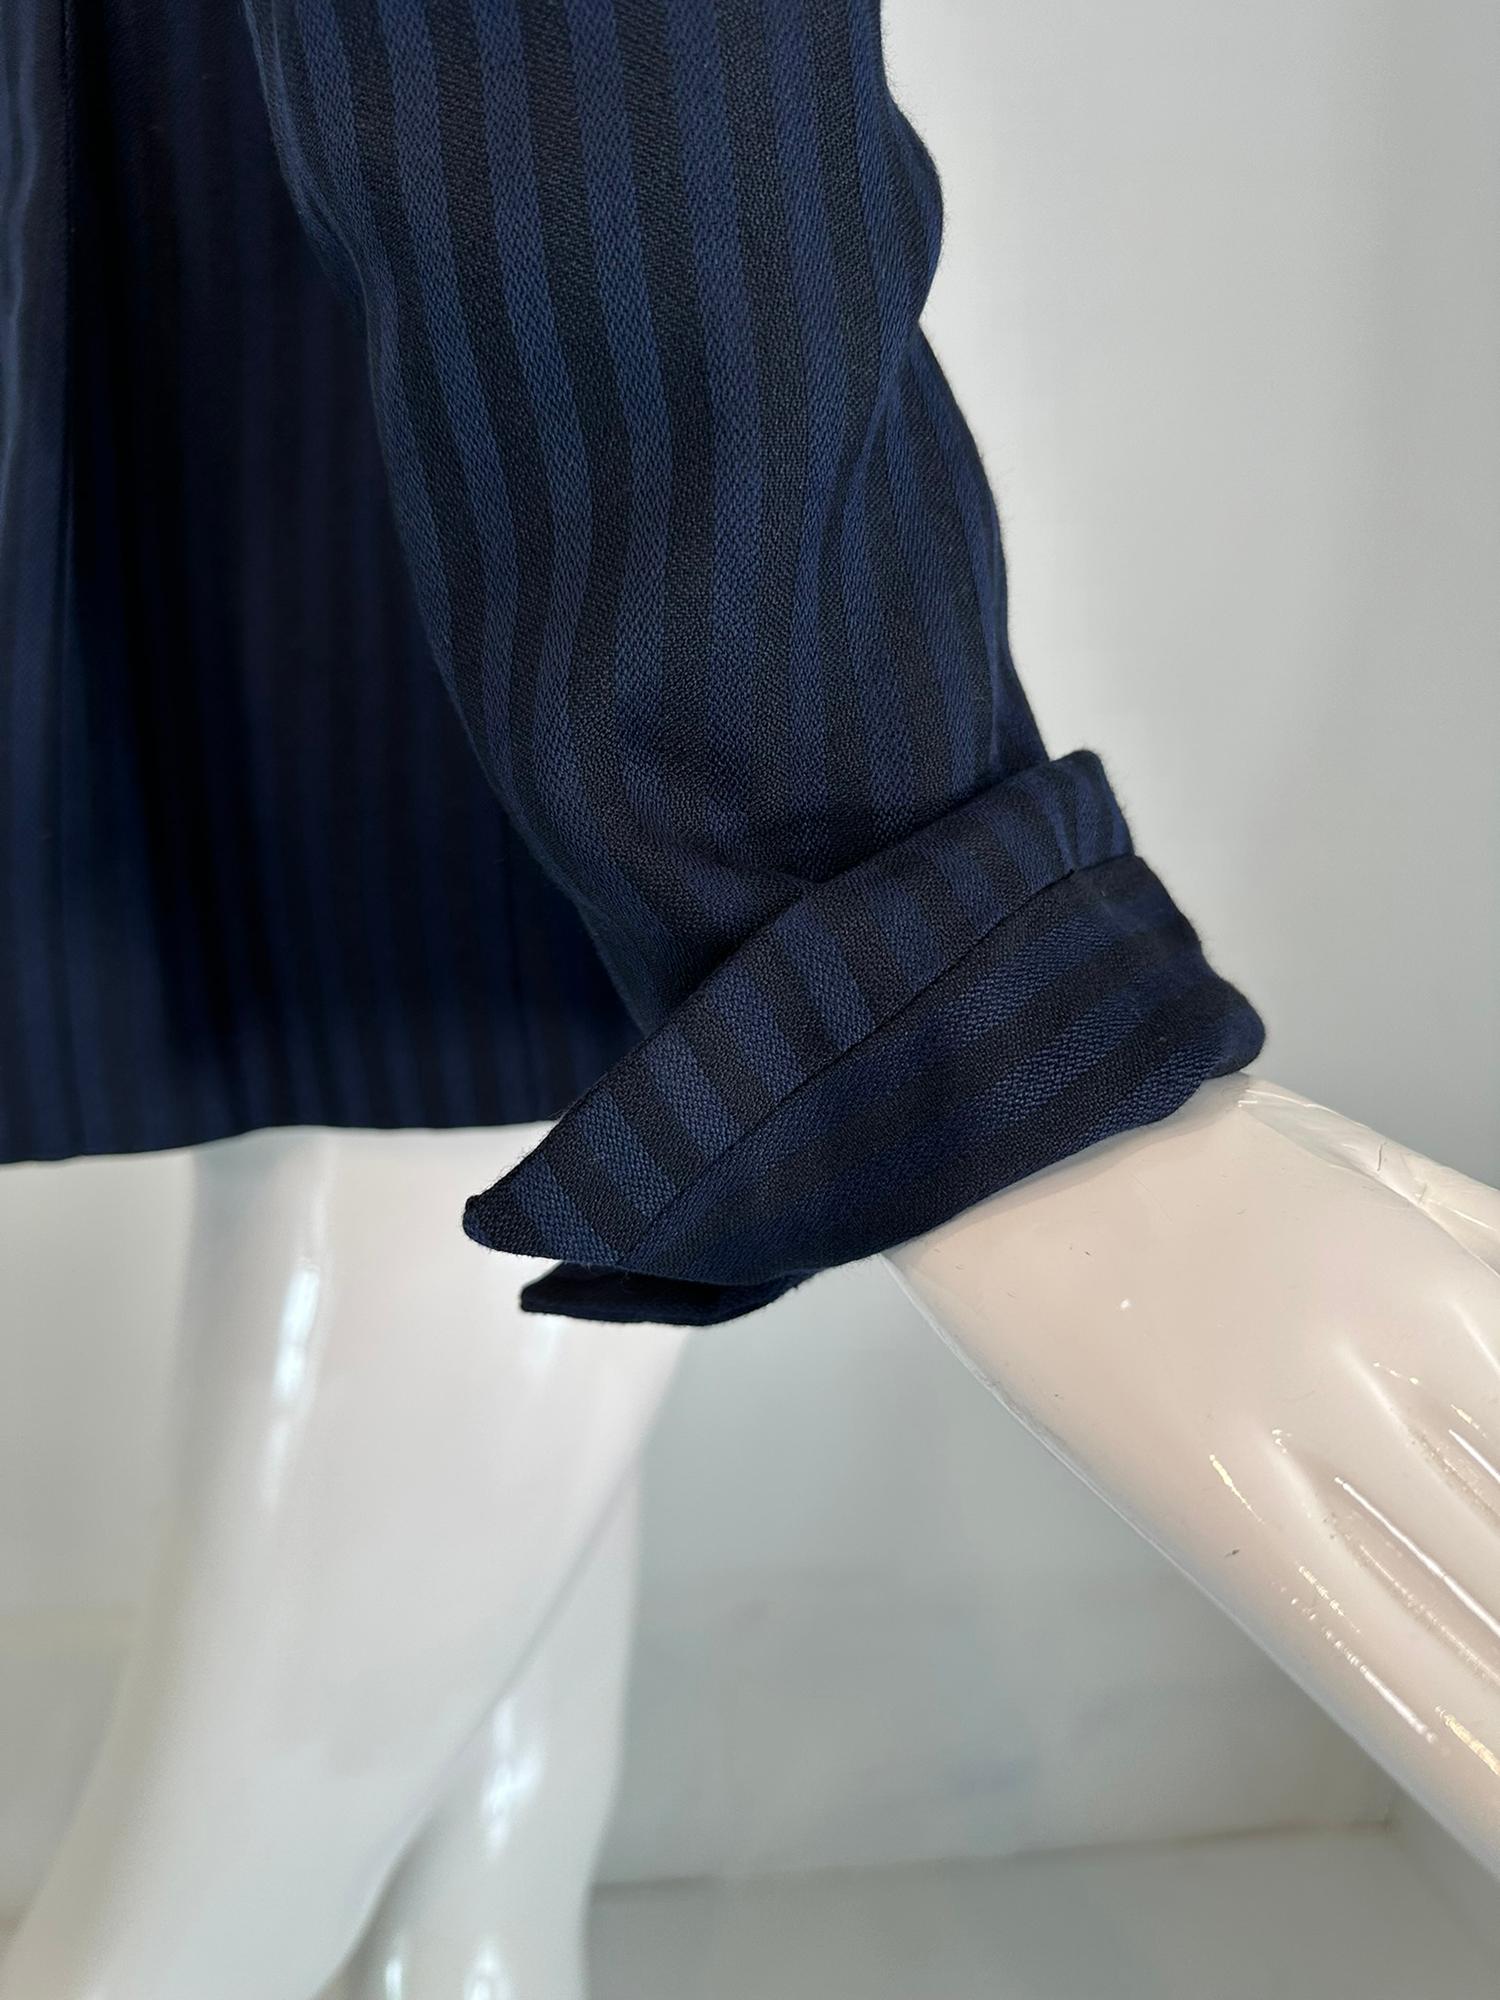 Christian Dior Navy Blue & Black Wide Stripe Wool Twill Jacket Late 90s-2000s 4 For Sale 8